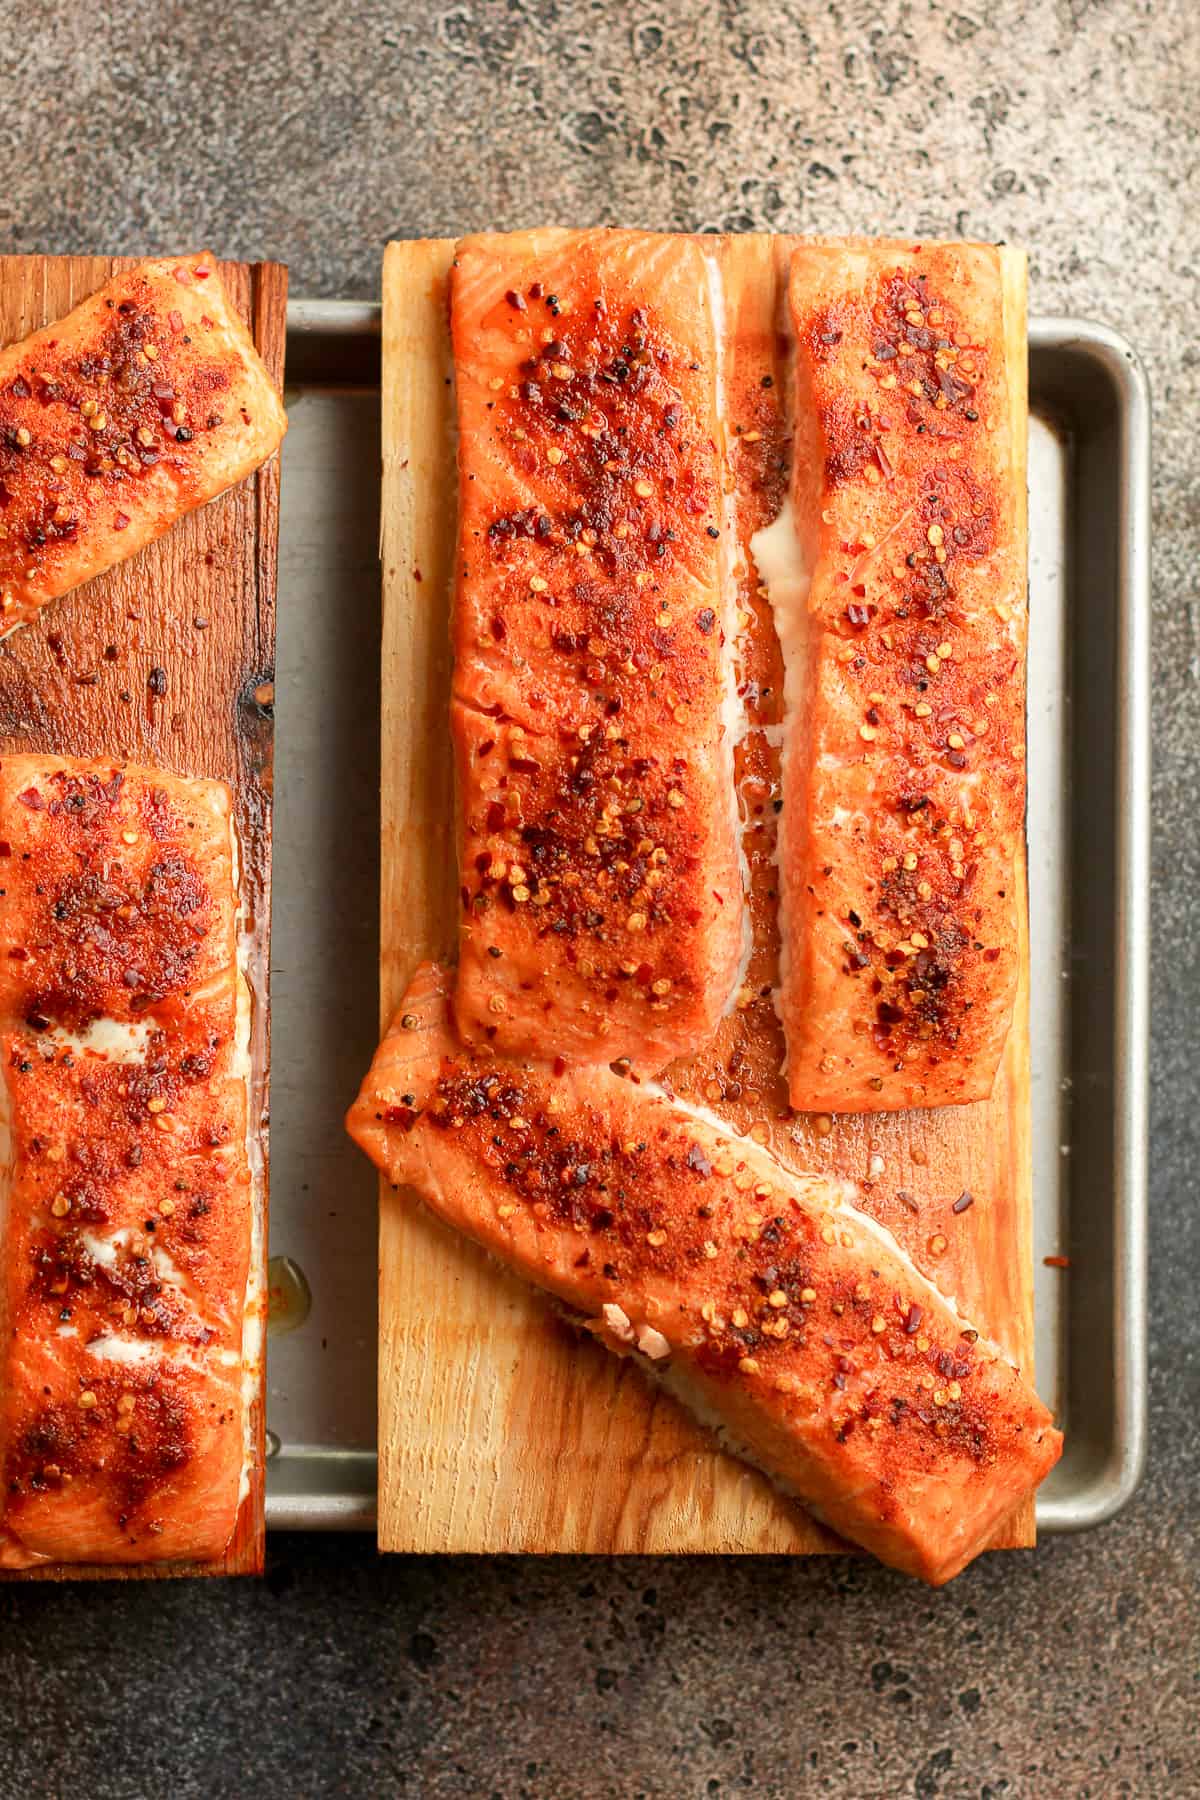 Overhead shot of the cedar plank salmon after removing it from the grill.